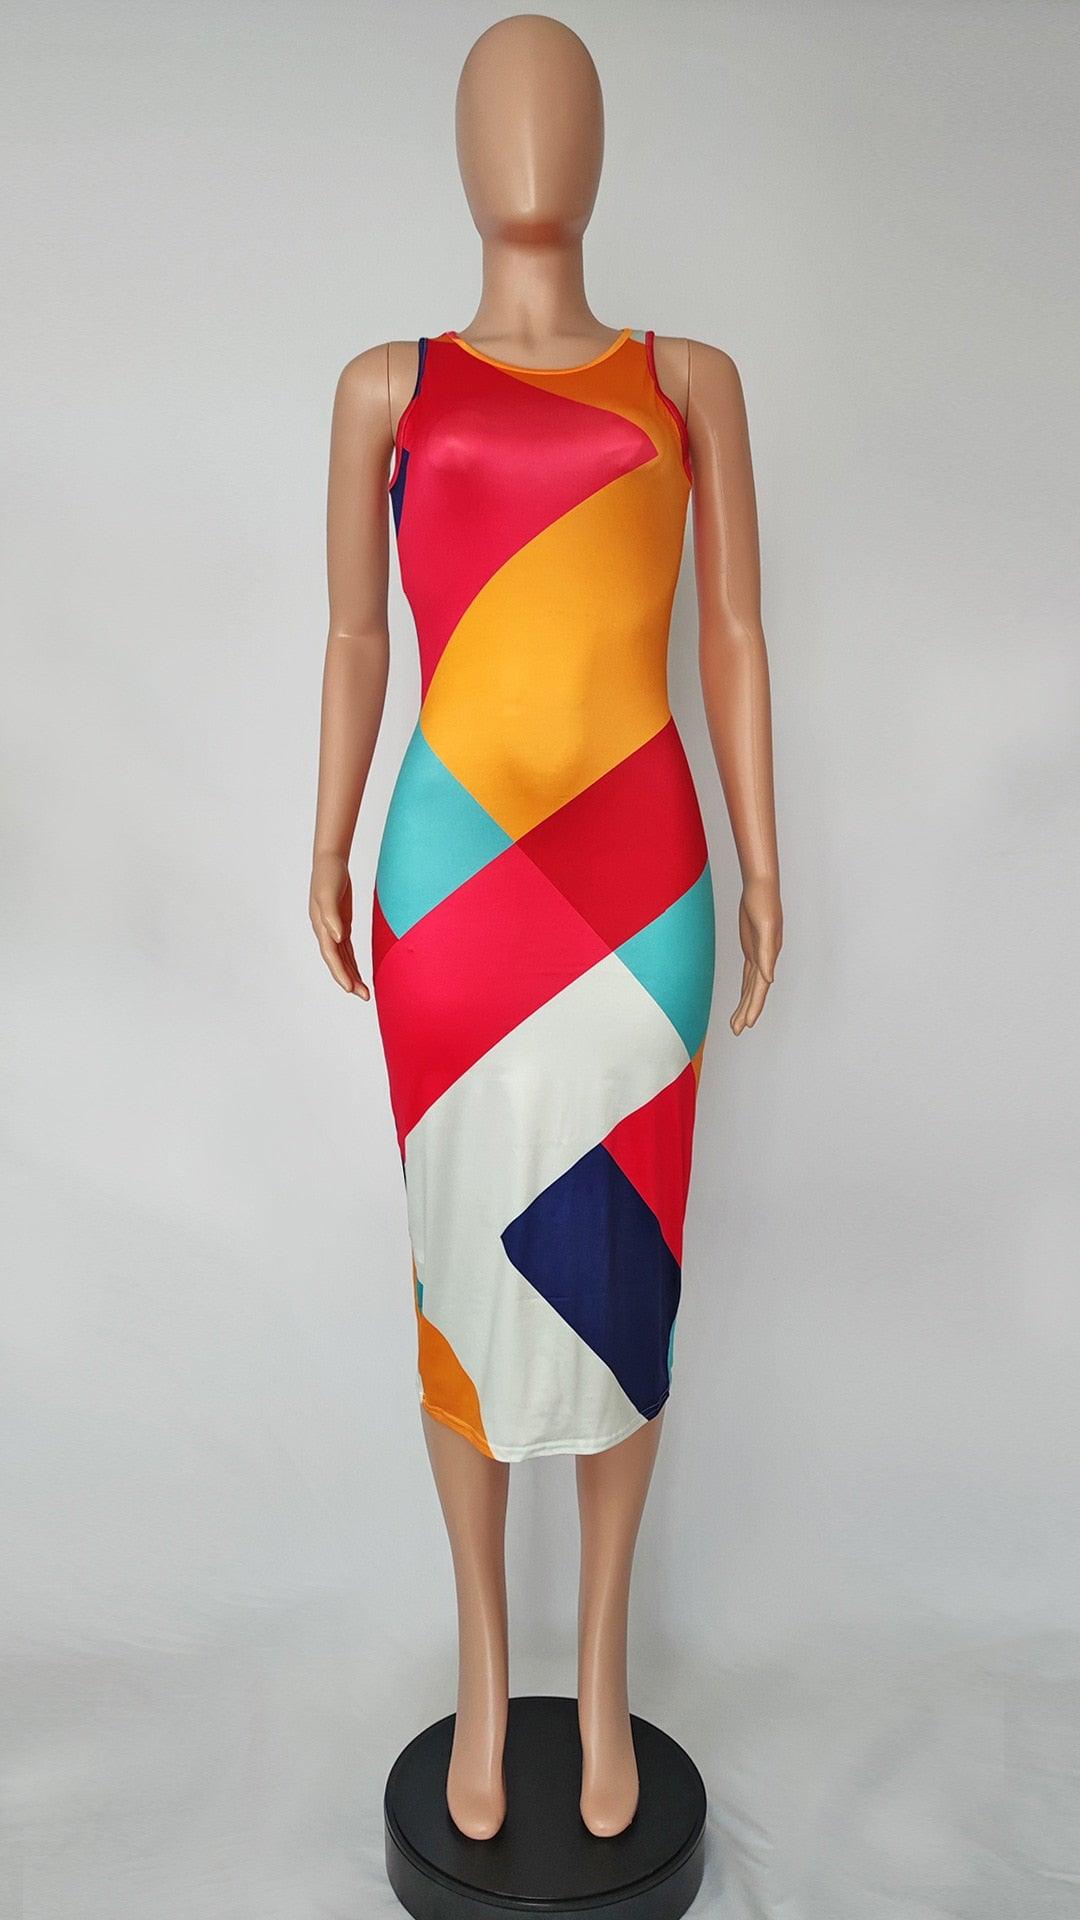 Abstract Collection-Retro Tank Pattern Dress - ODDSALTBoutique